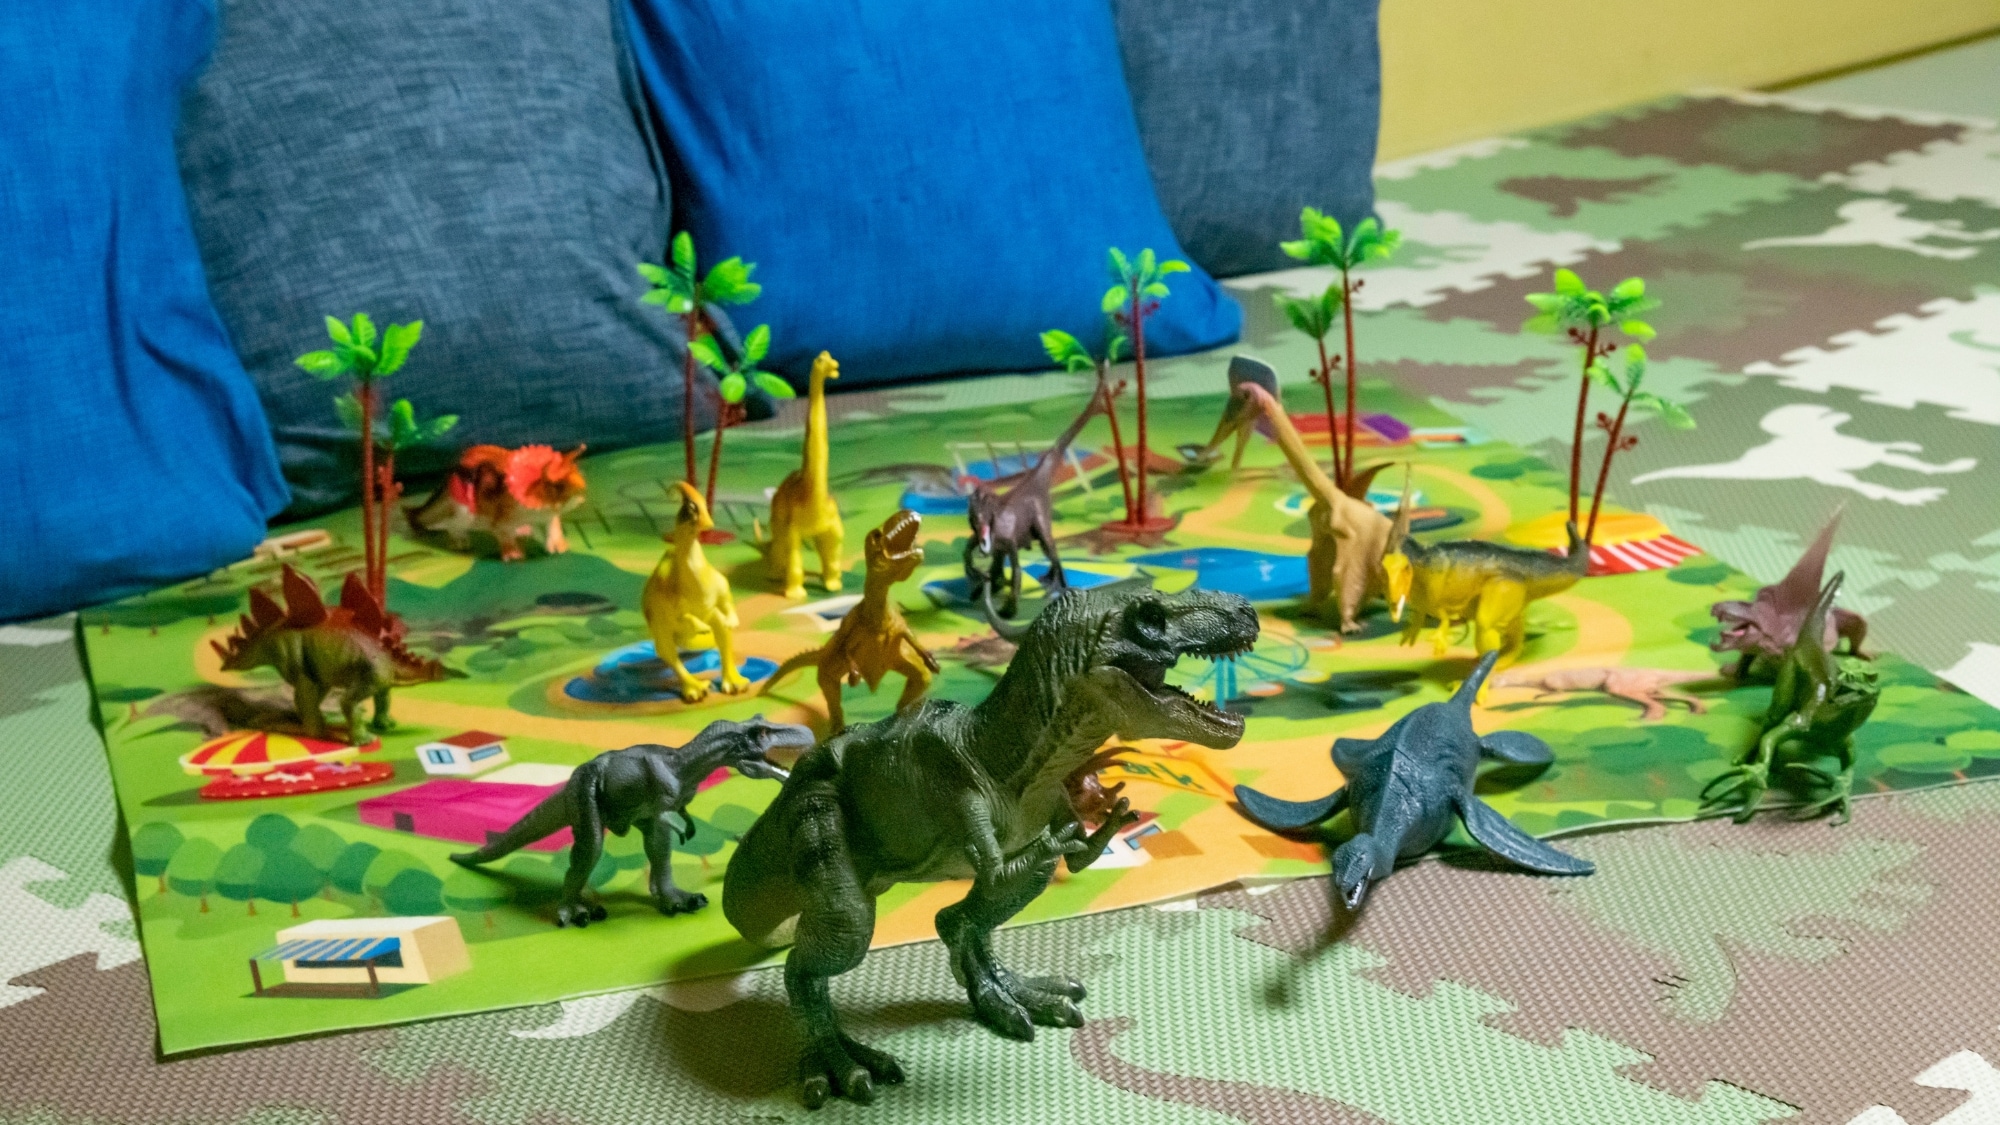 Let the dinosaur figures take a walk or fight! If you are a dinosaur lover, smile involuntarily ♪